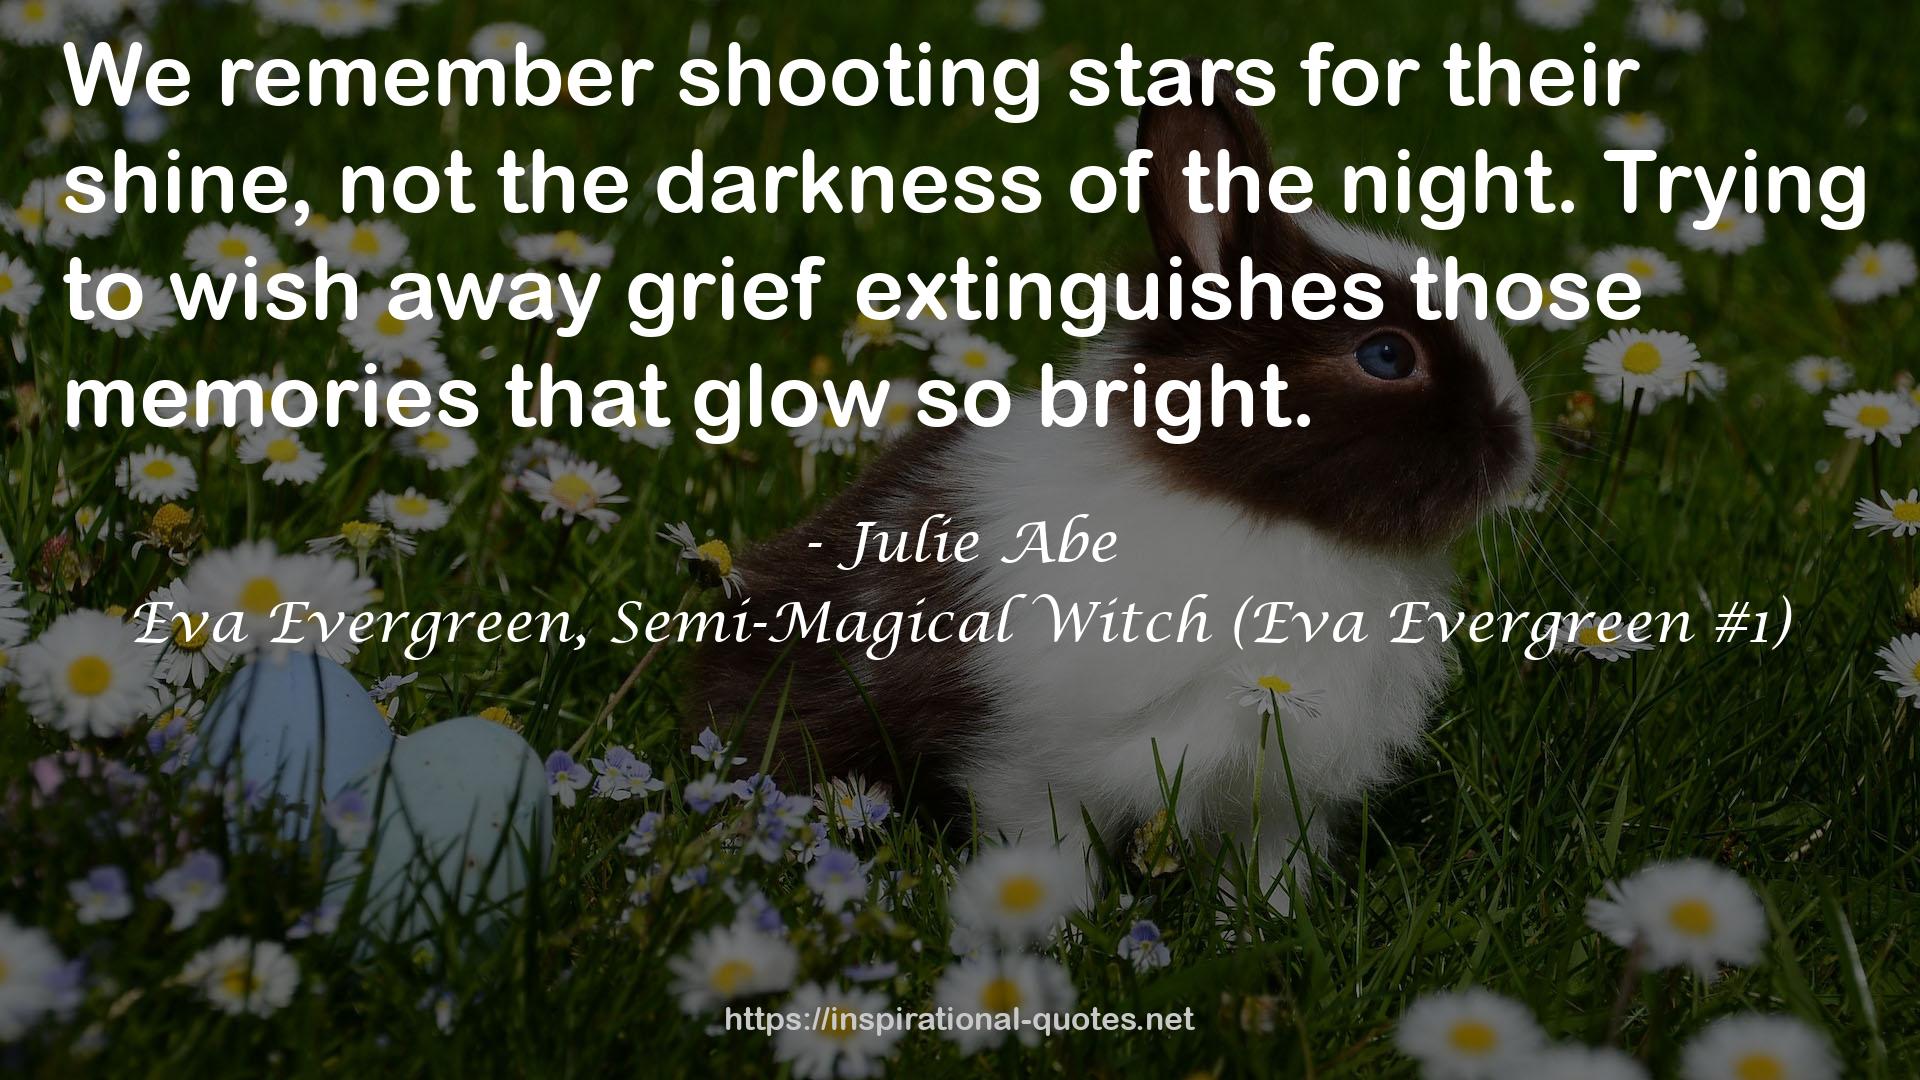 Julie Abe QUOTES